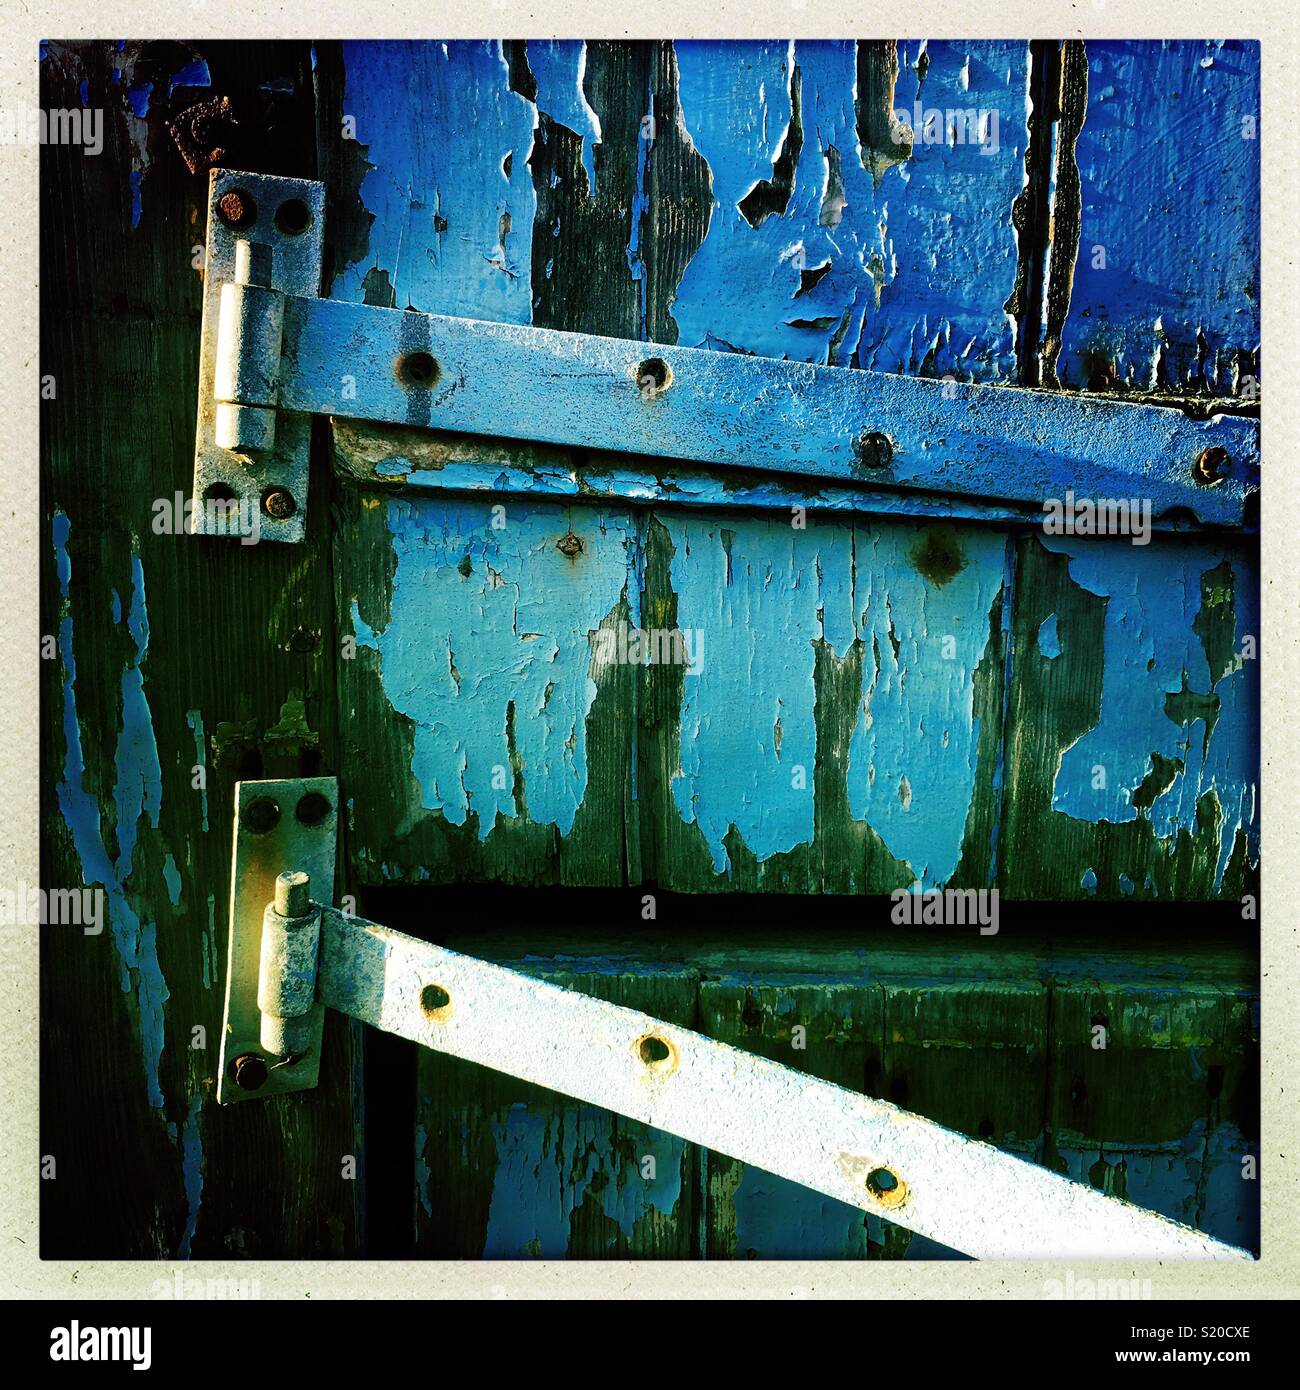 Urban decay; peeling blue paint and hinges. Stock Photo